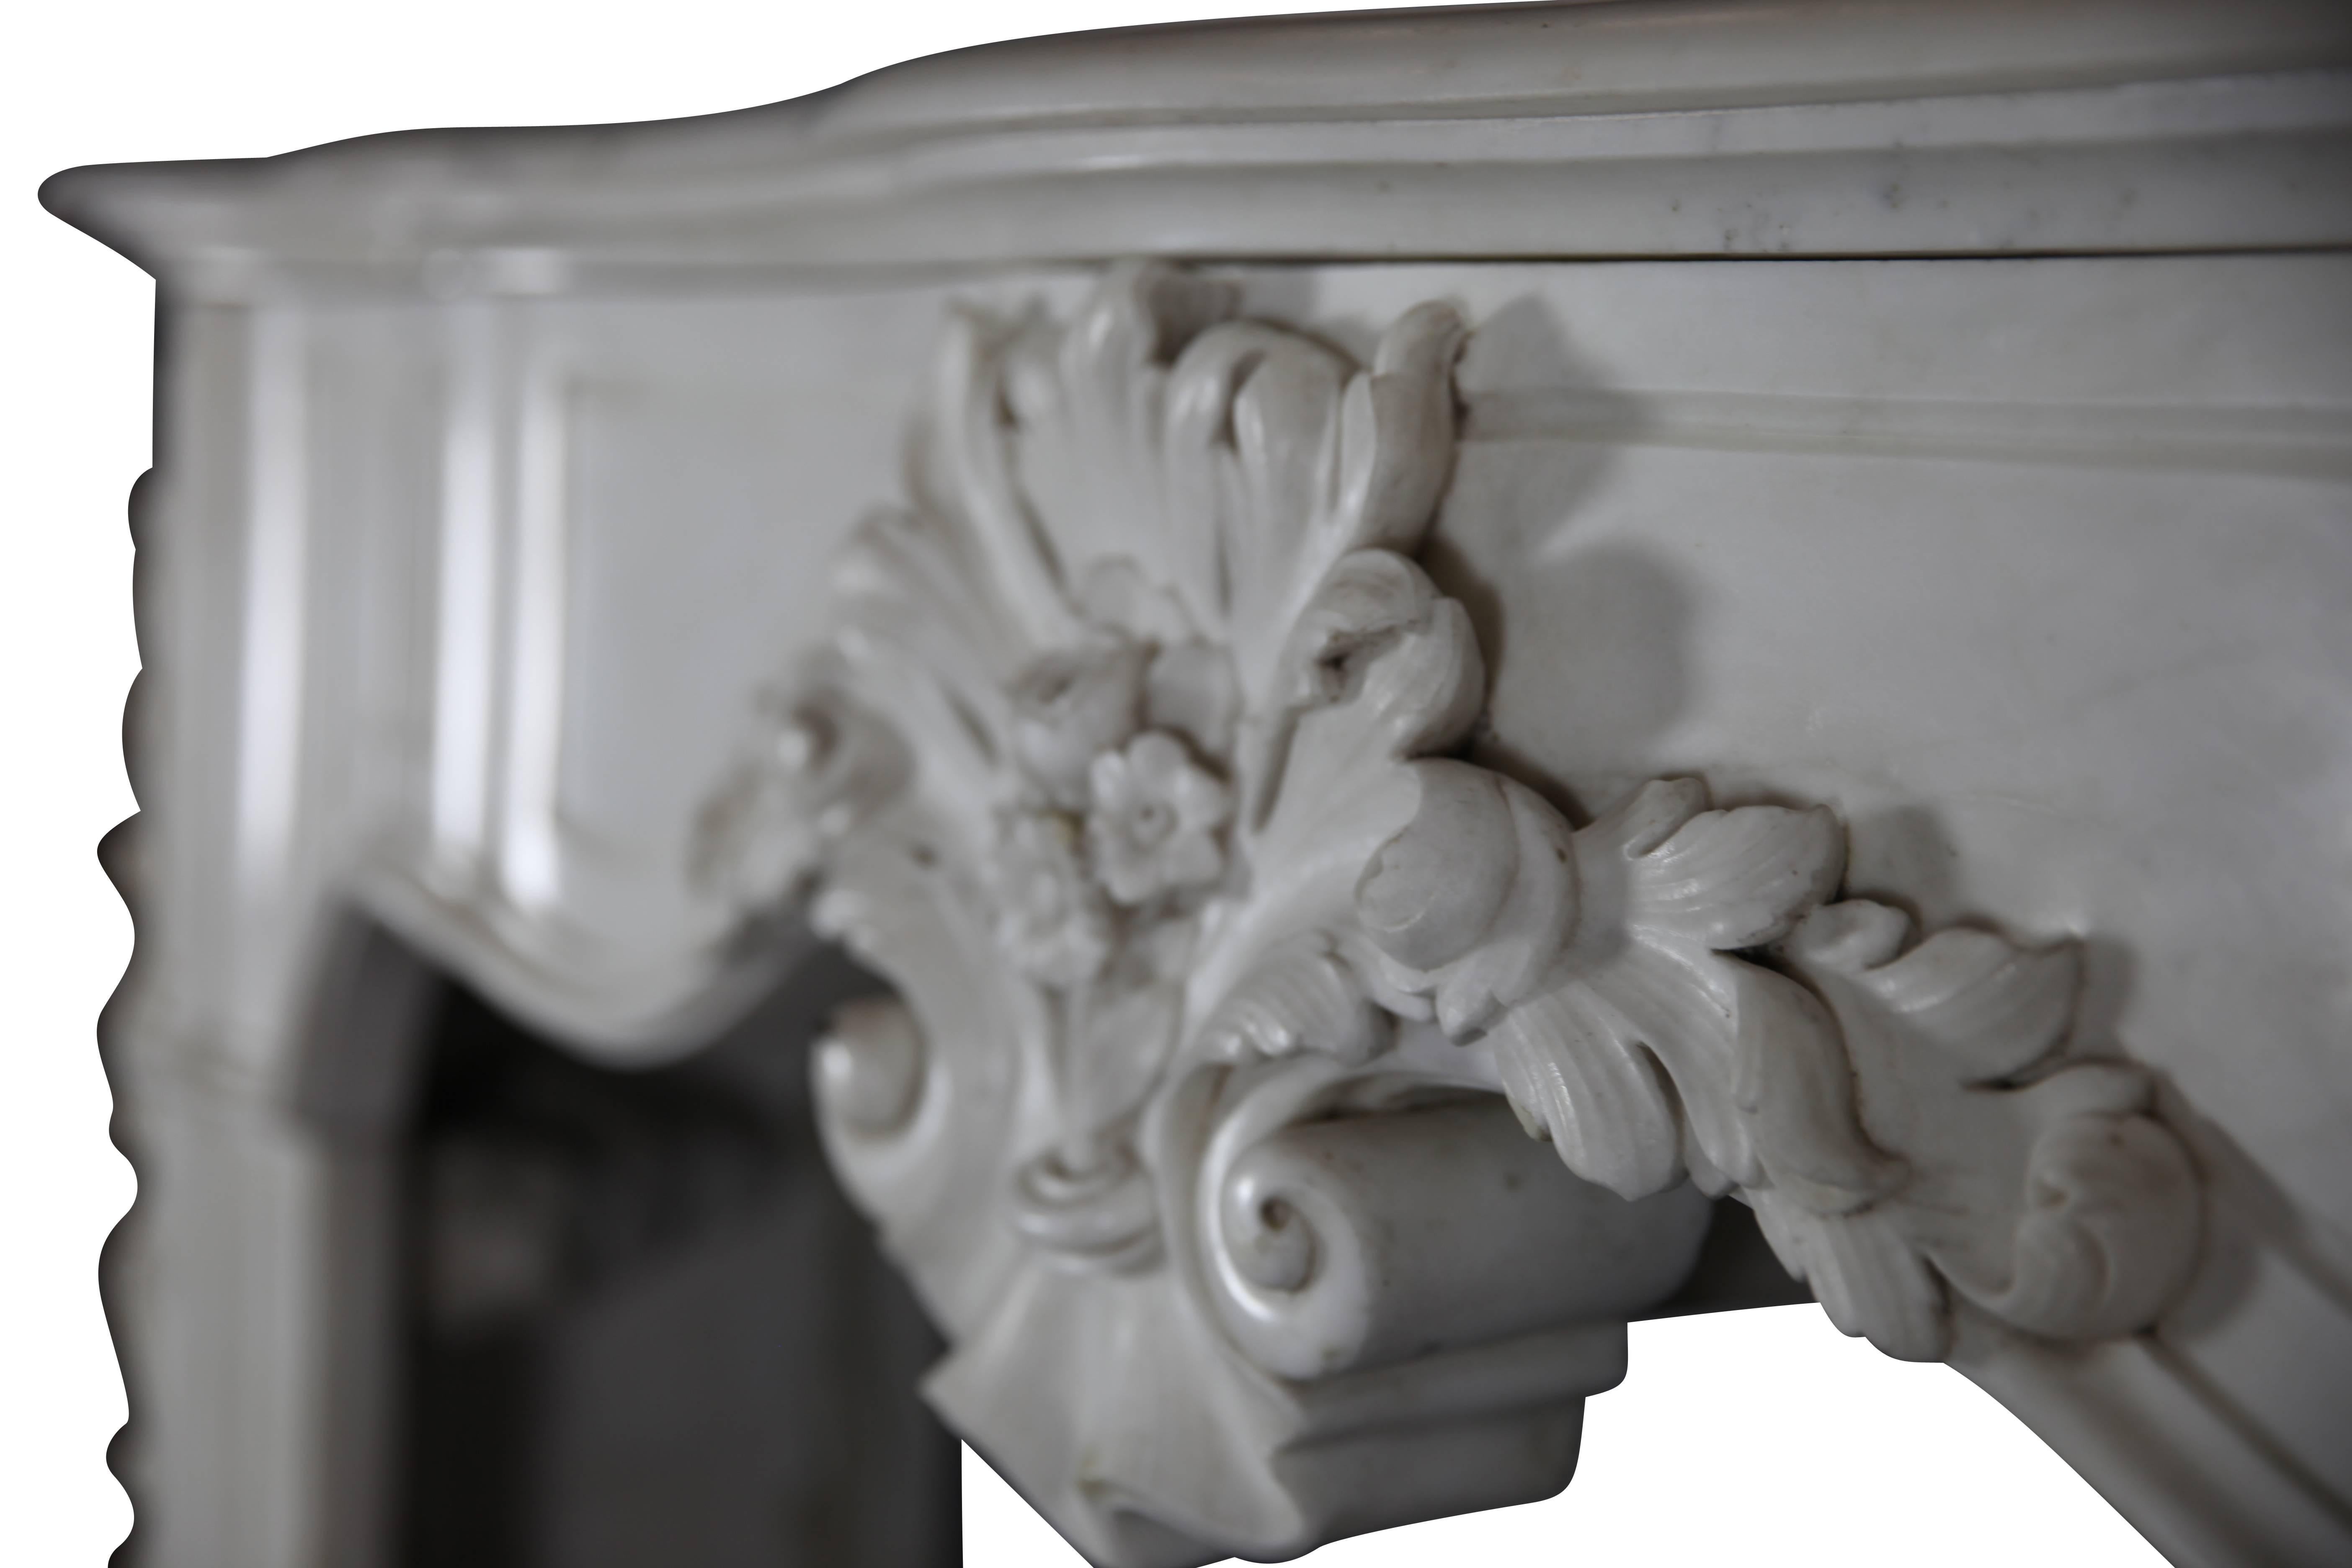 Rococo Revival 19th Century White Statuary Marble Antique Fireplace Mantel For Sale